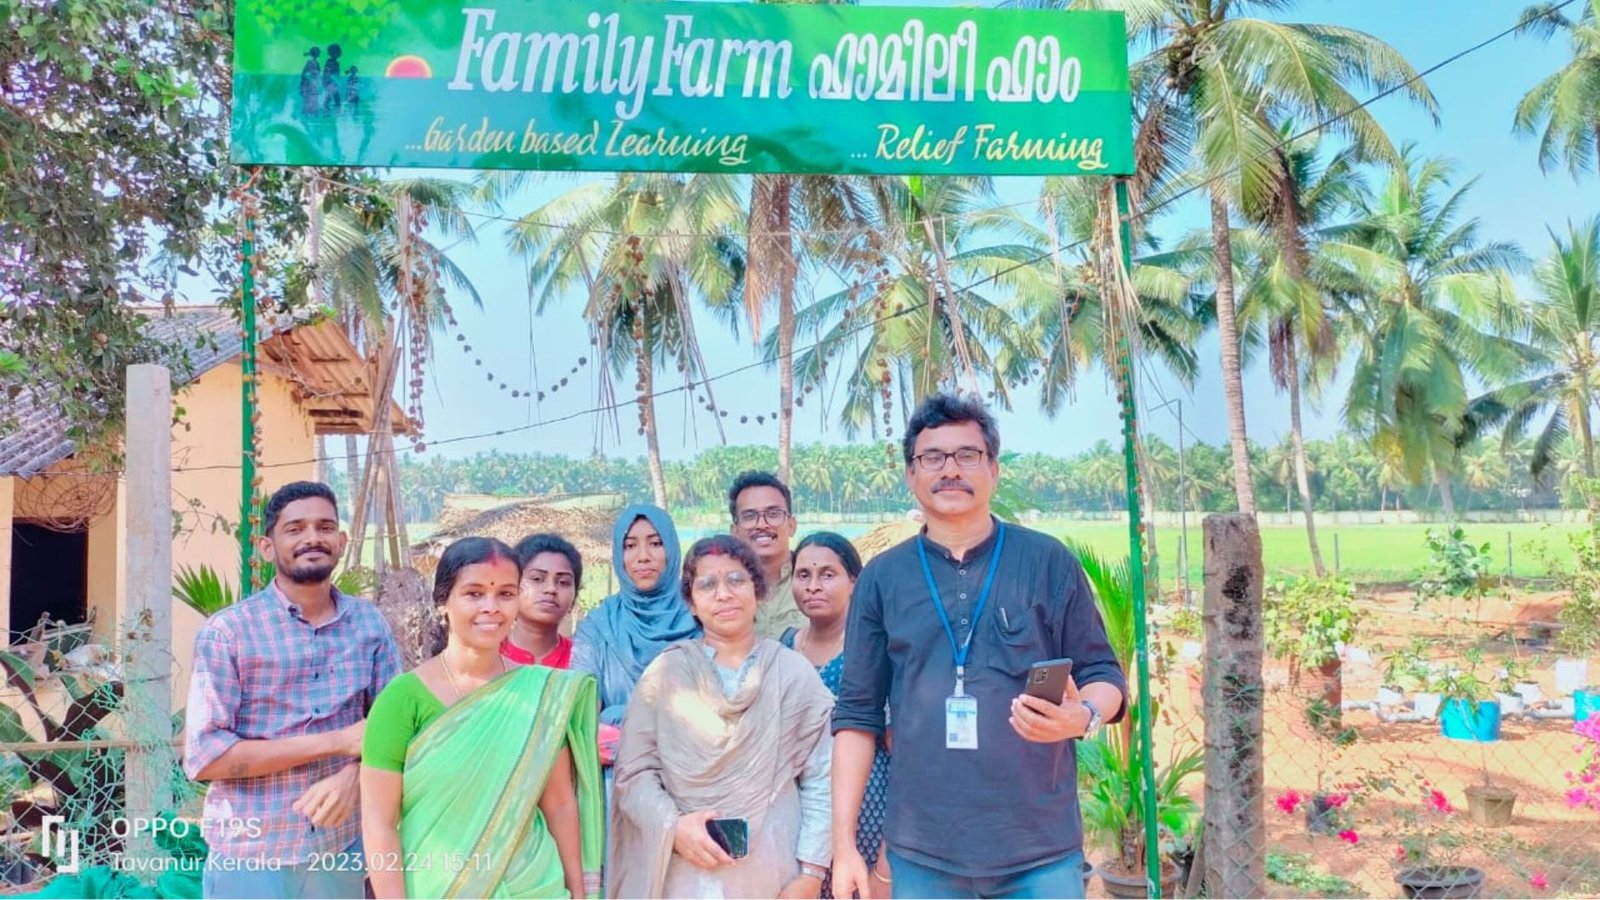 P K Abdul Jabbar (extreme right) with his team members at the Family Farm of KAU at Thavanur.